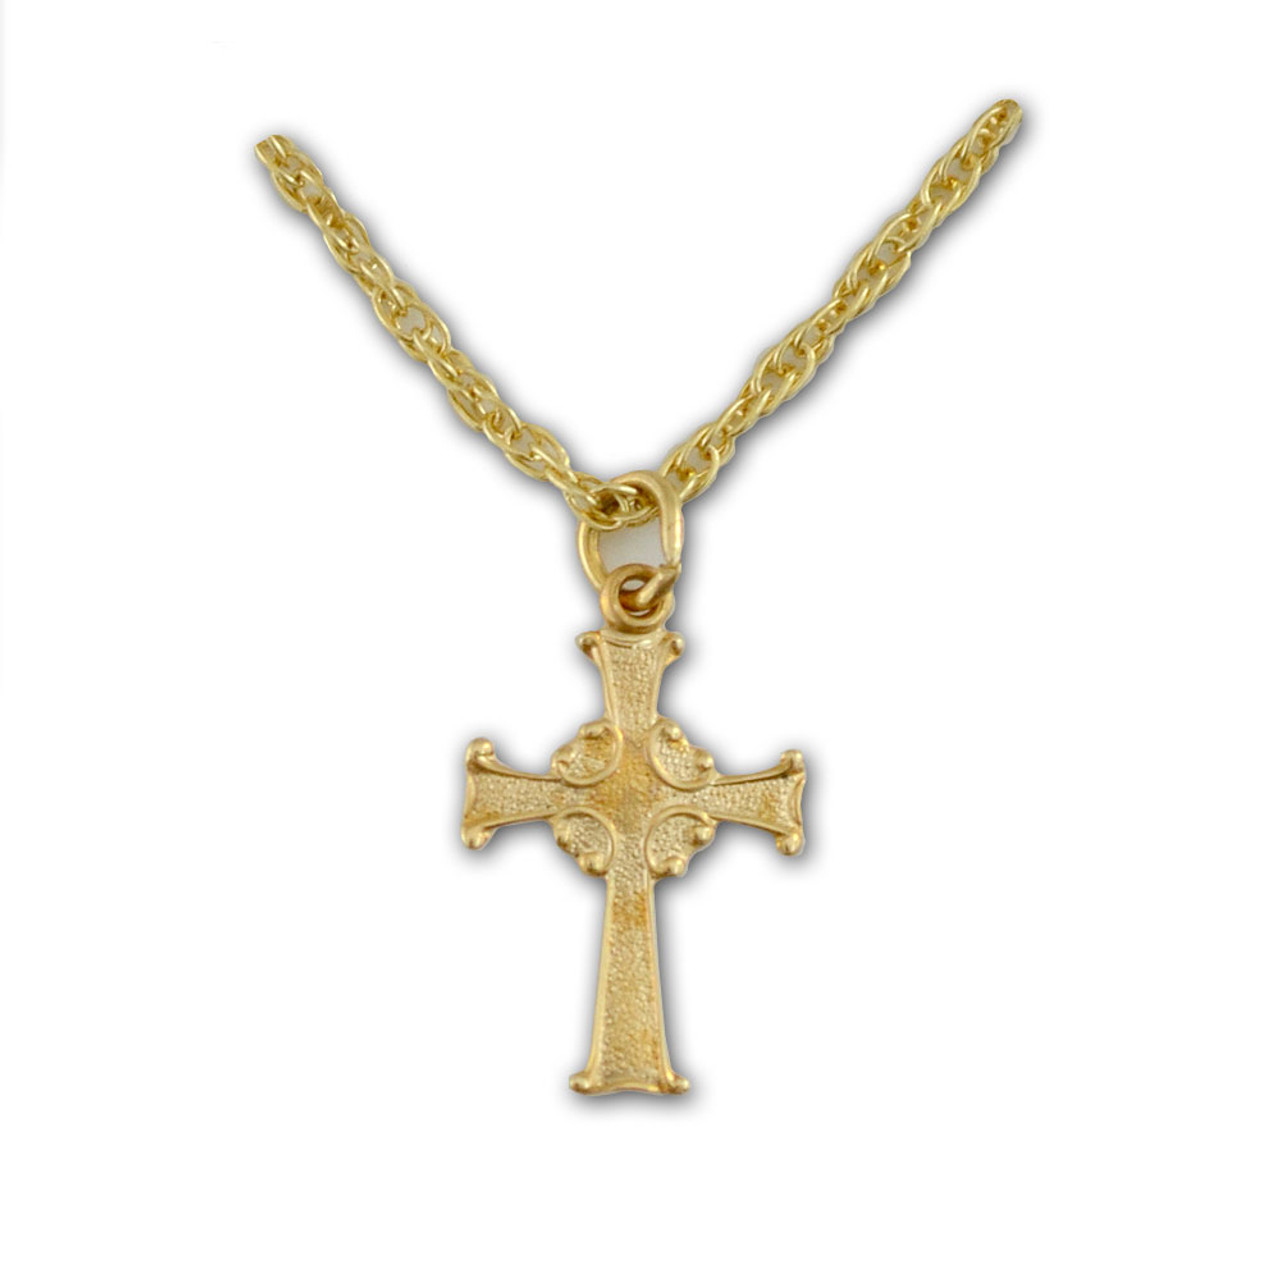 Buy Elegant Image Jewelry24k Crucifix Pendant by Elegant Image Jewelry -  Classic Crucifix Pendant is 24k Gold - Cross Necklace for Men and Women -  Great Crucifix Necklace for you or Gift -